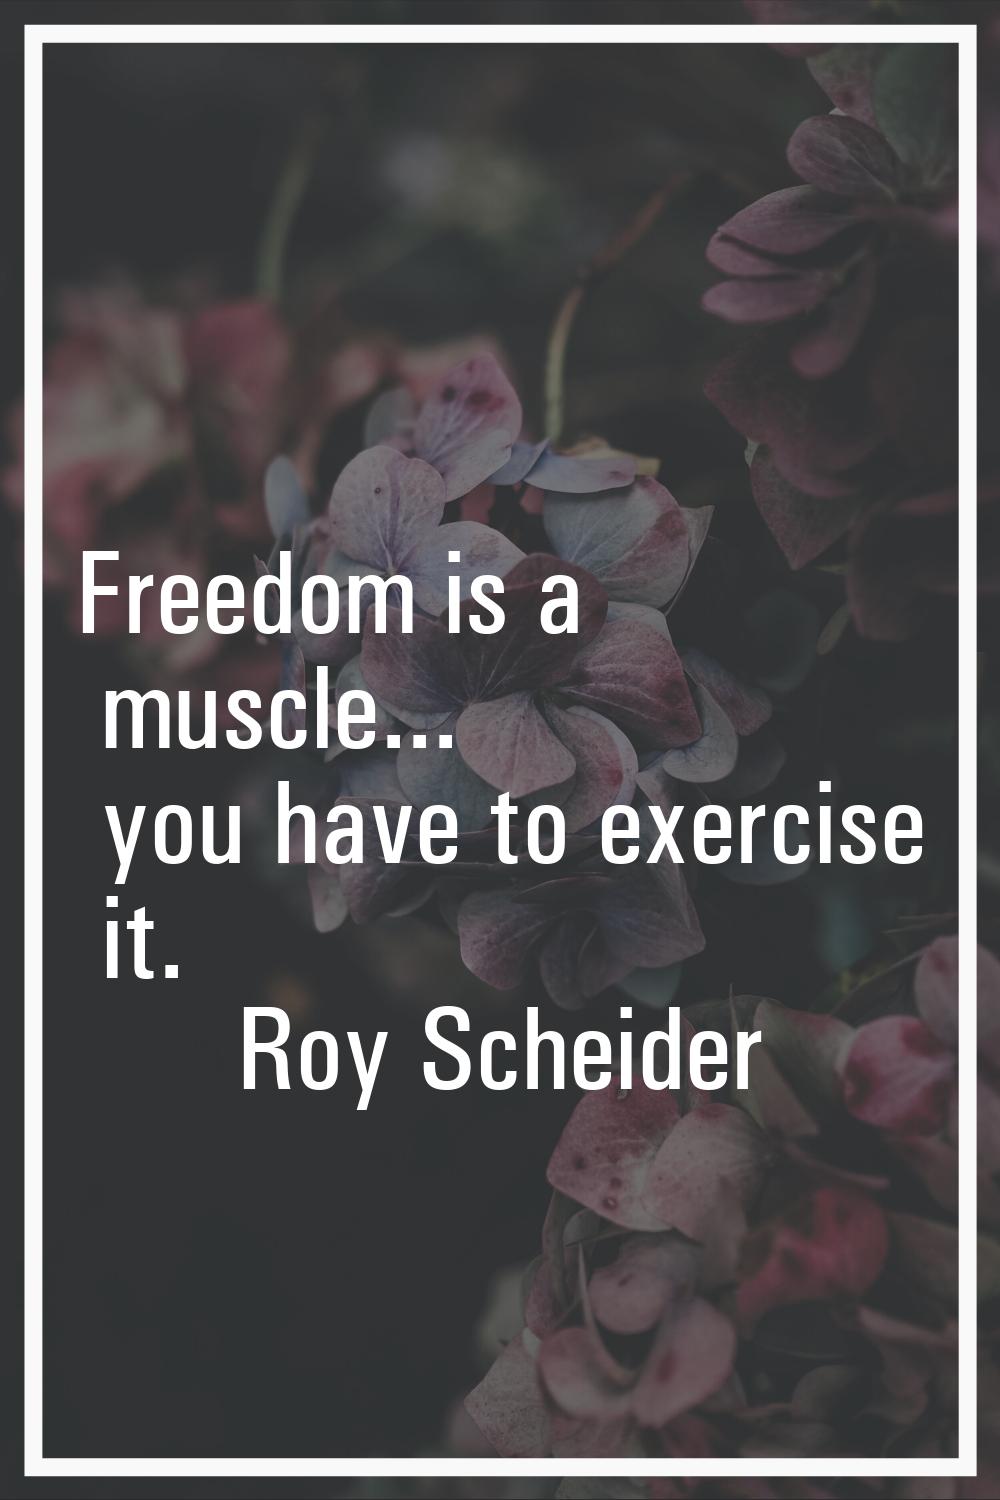 Freedom is a muscle... you have to exercise it.